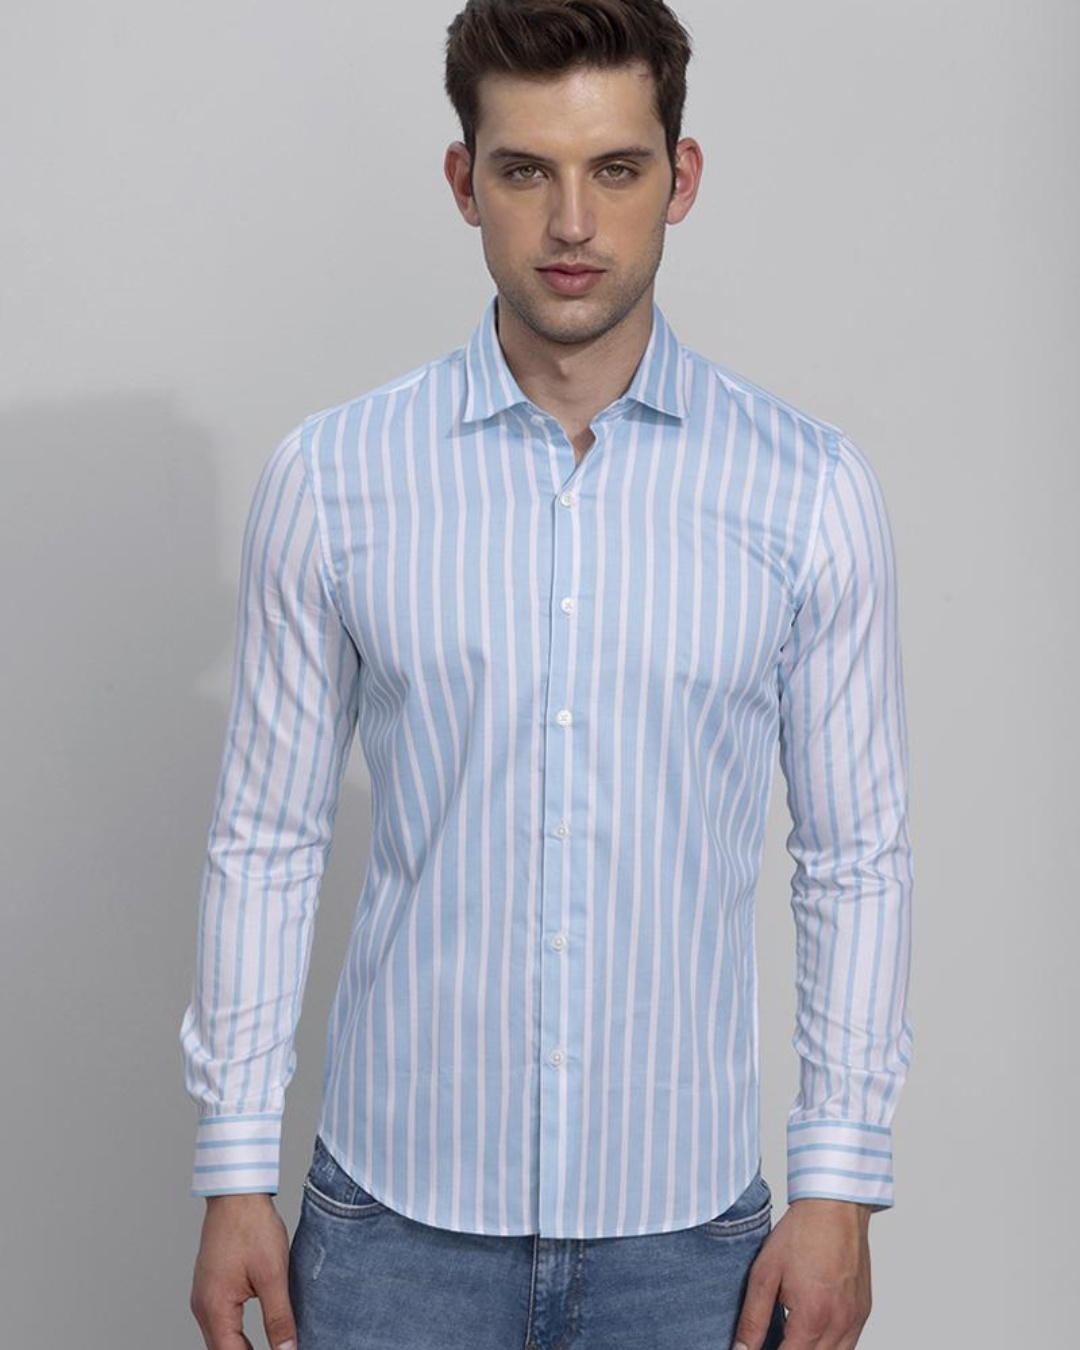 Buy Men's Blue and White Extreme Striped Slim Fit Shirt for Men Blue ...